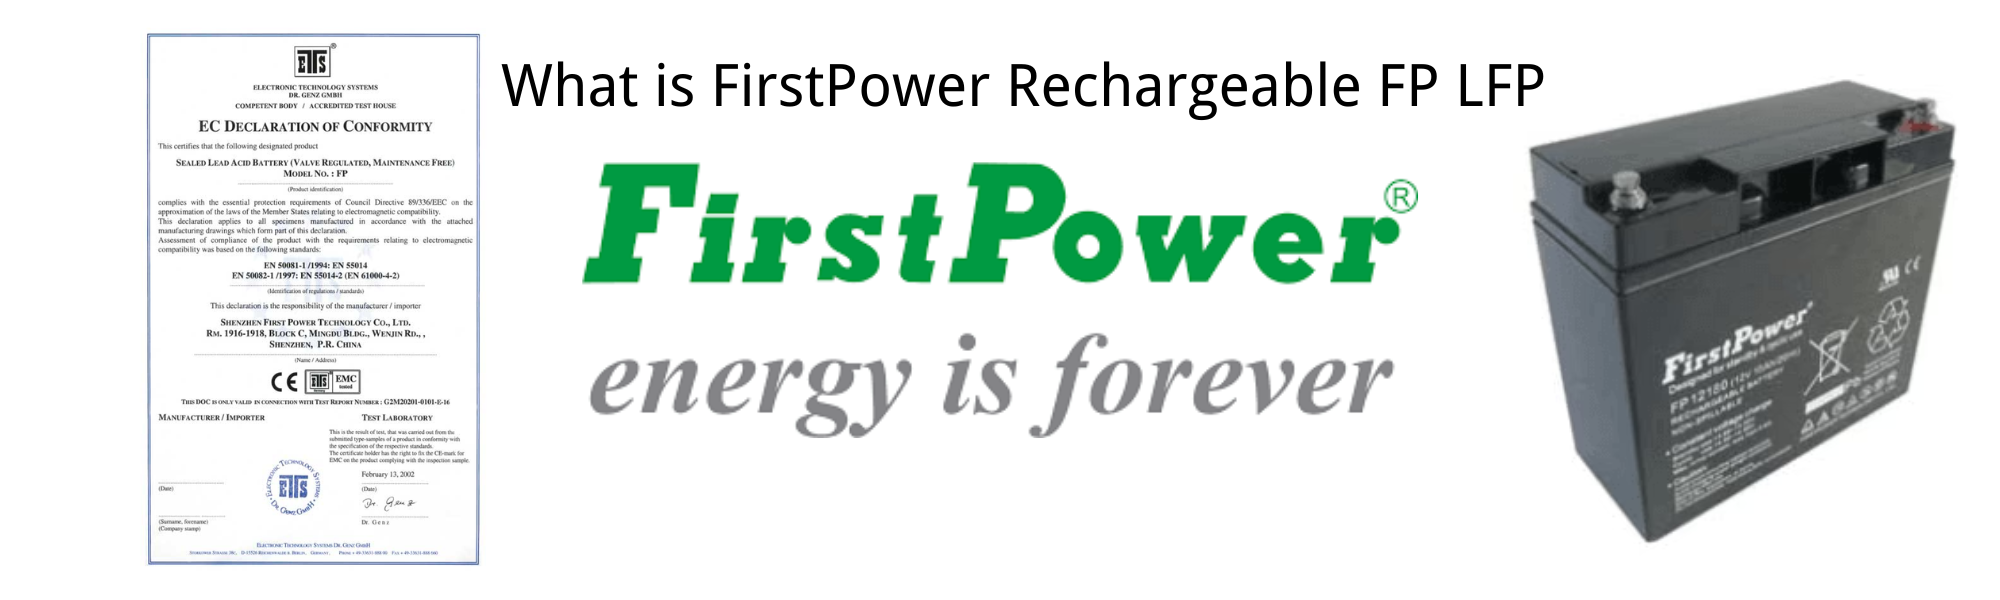 FirstPower Rechargeable FP LFP Sealed Lead Acid Battery